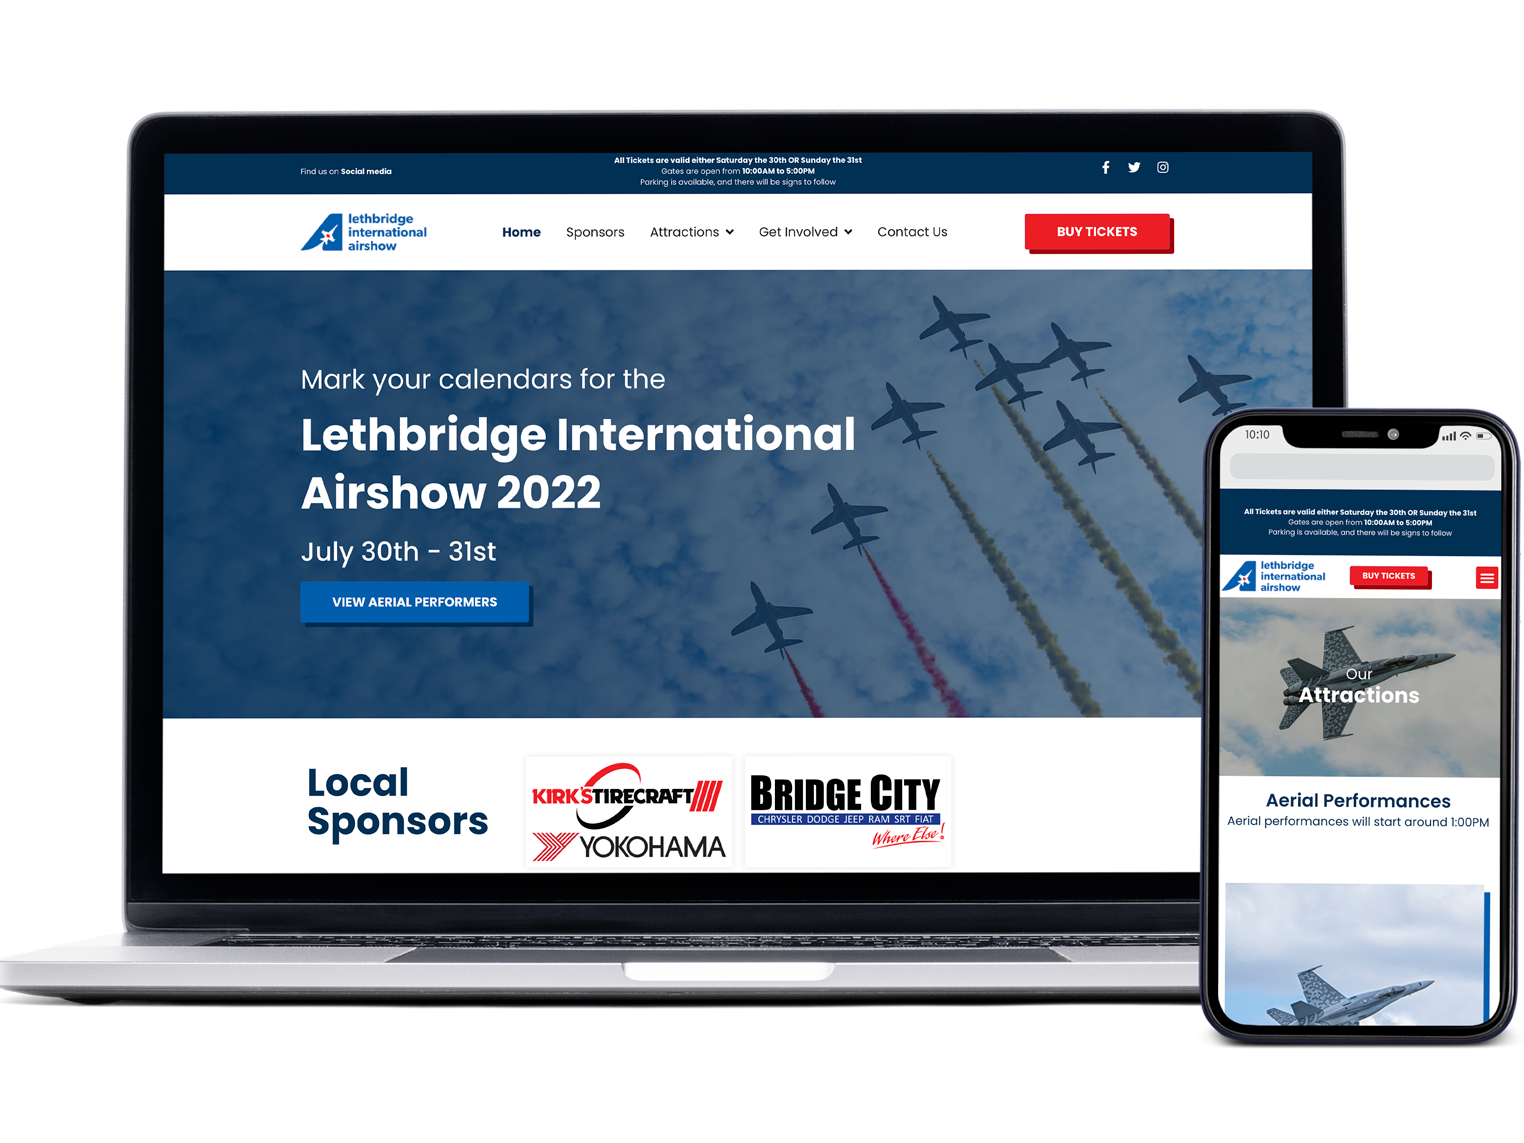 lethbridge international airshow website mockup on mobile and laptop devices